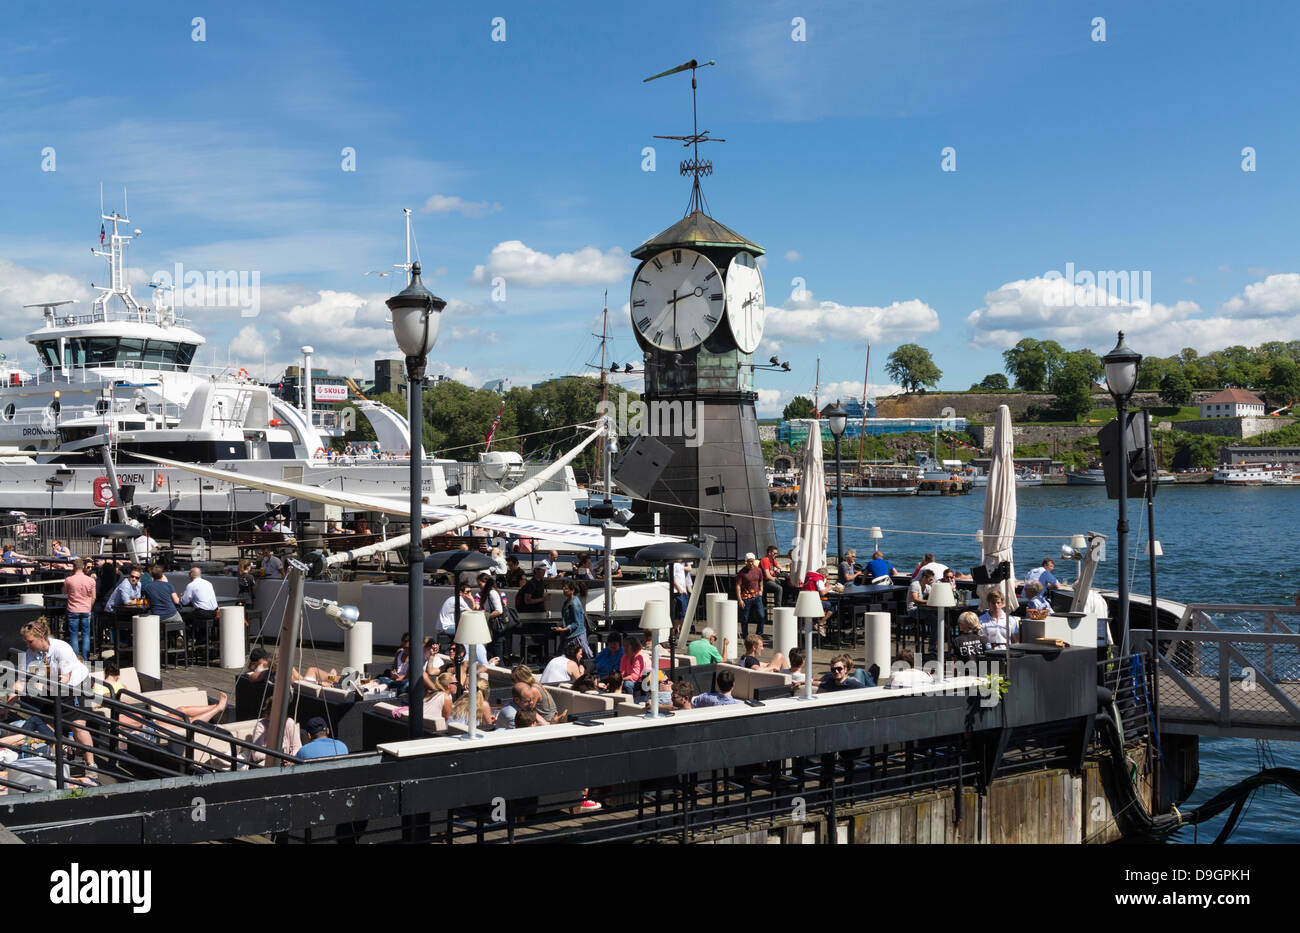 Clock Tower in Pipervika Waterfront, Oslo Harbour, Norway, Europe with people at cafes Stock Photo